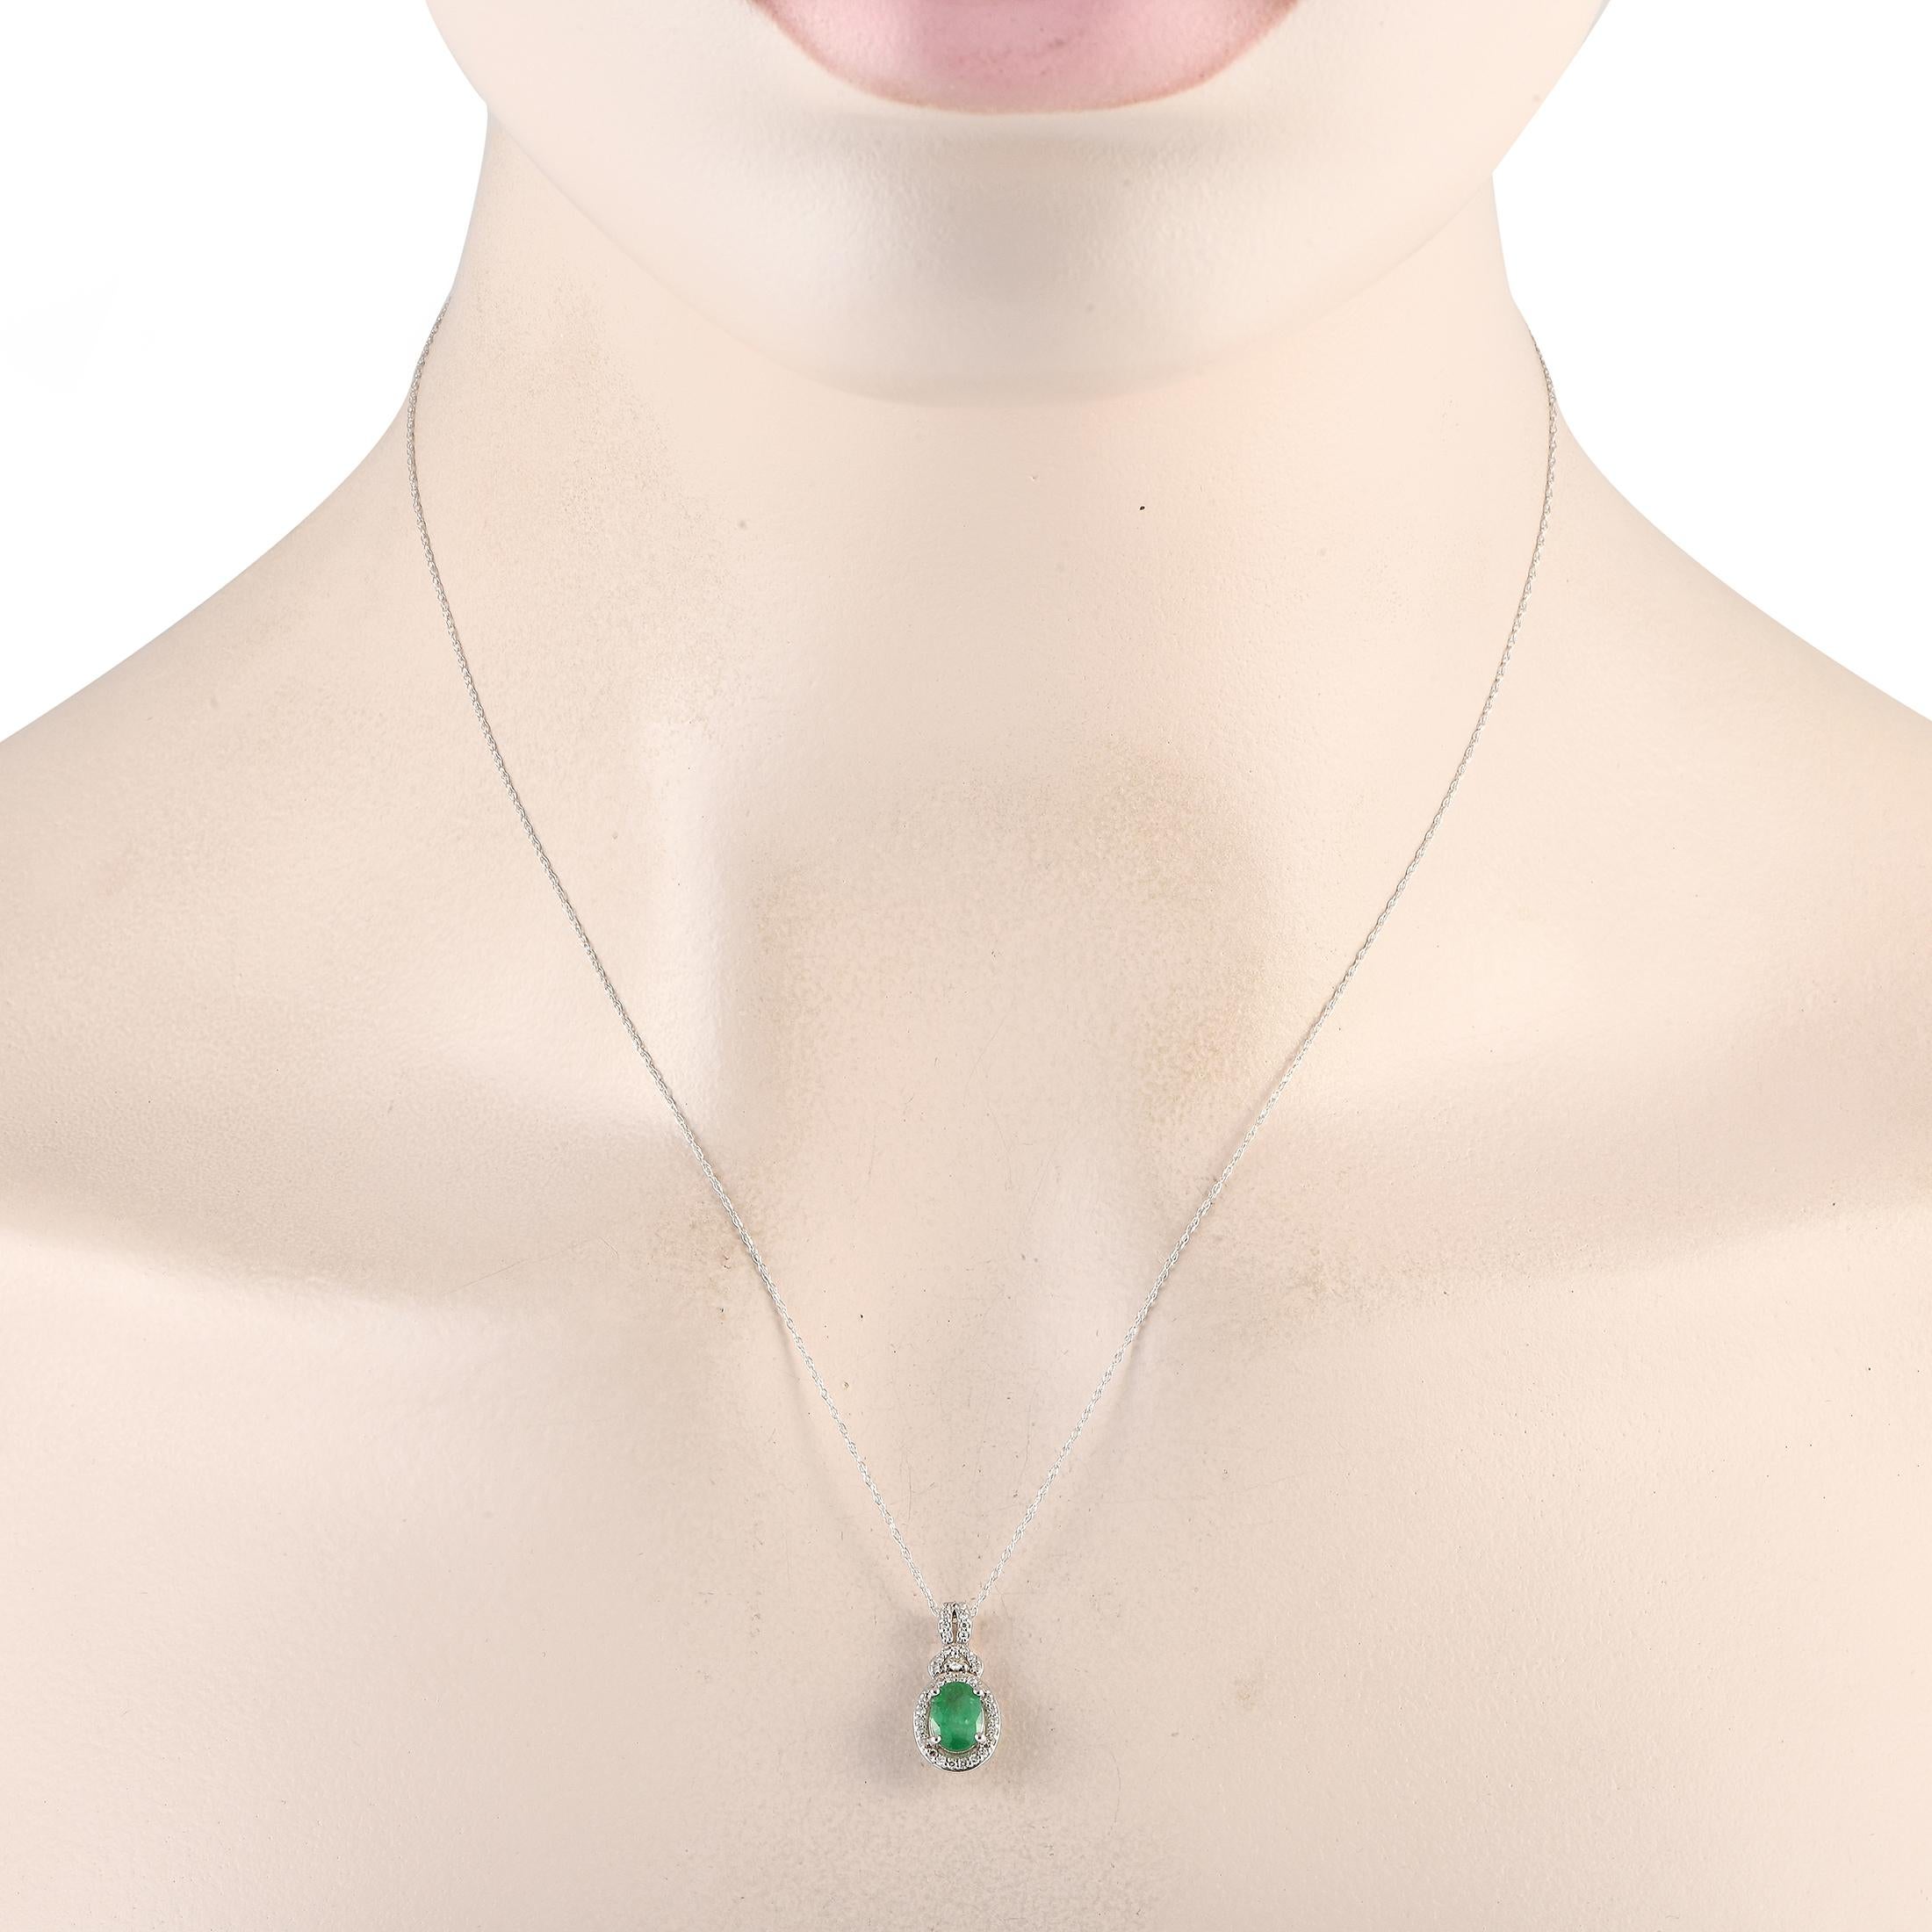 A classic piece that can be your new everyday piece. This 14K white gold necklace features a delicate cable chain measuring 18 inches long. It features a split-style bail traced with diamonds. The gorgeous green emerald stone haloed by an oval frame